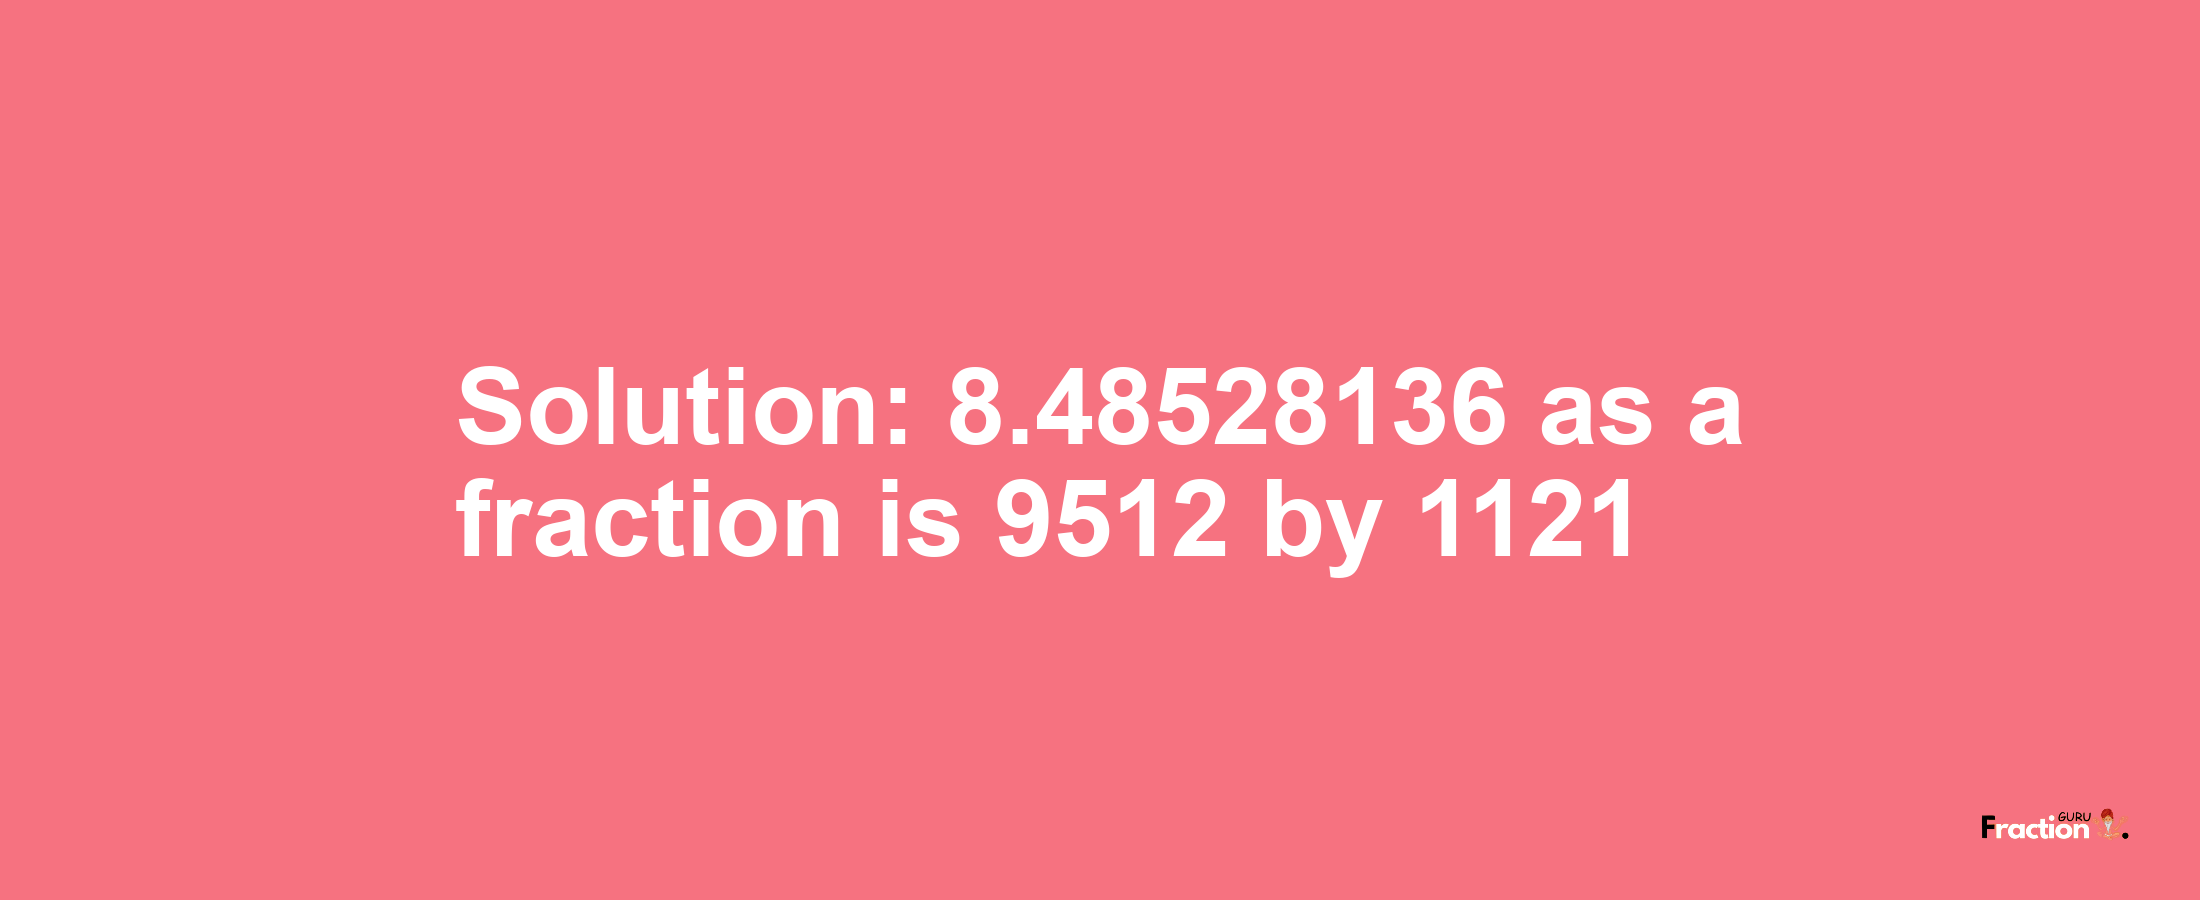 Solution:8.48528136 as a fraction is 9512/1121